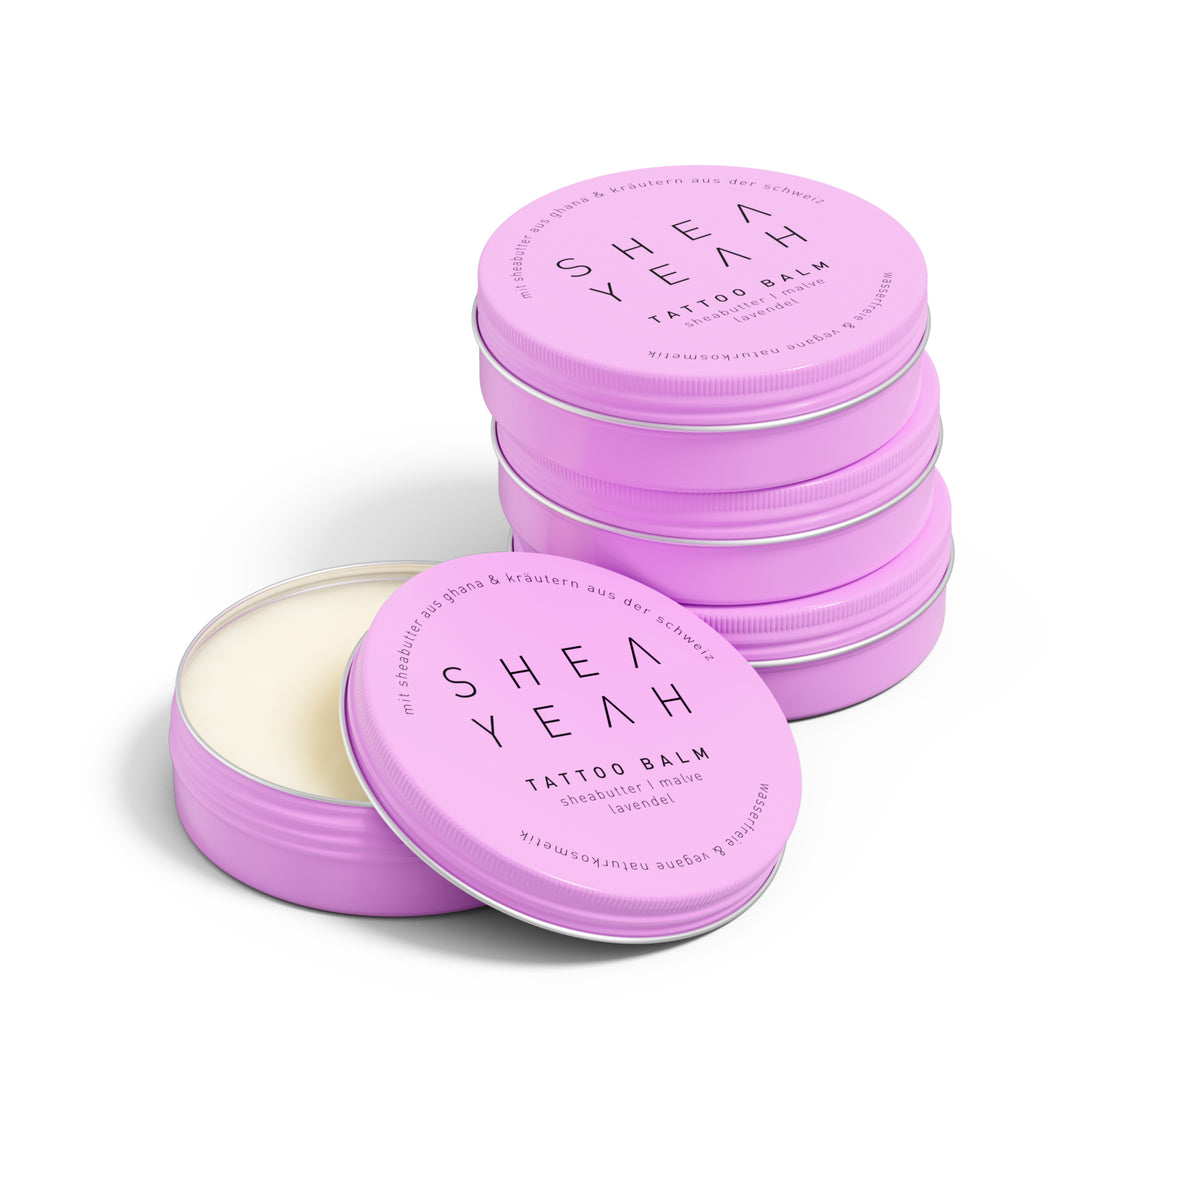 Family & Friends Pack Body Butter (Tattoo Balm) Lavendel-Duft